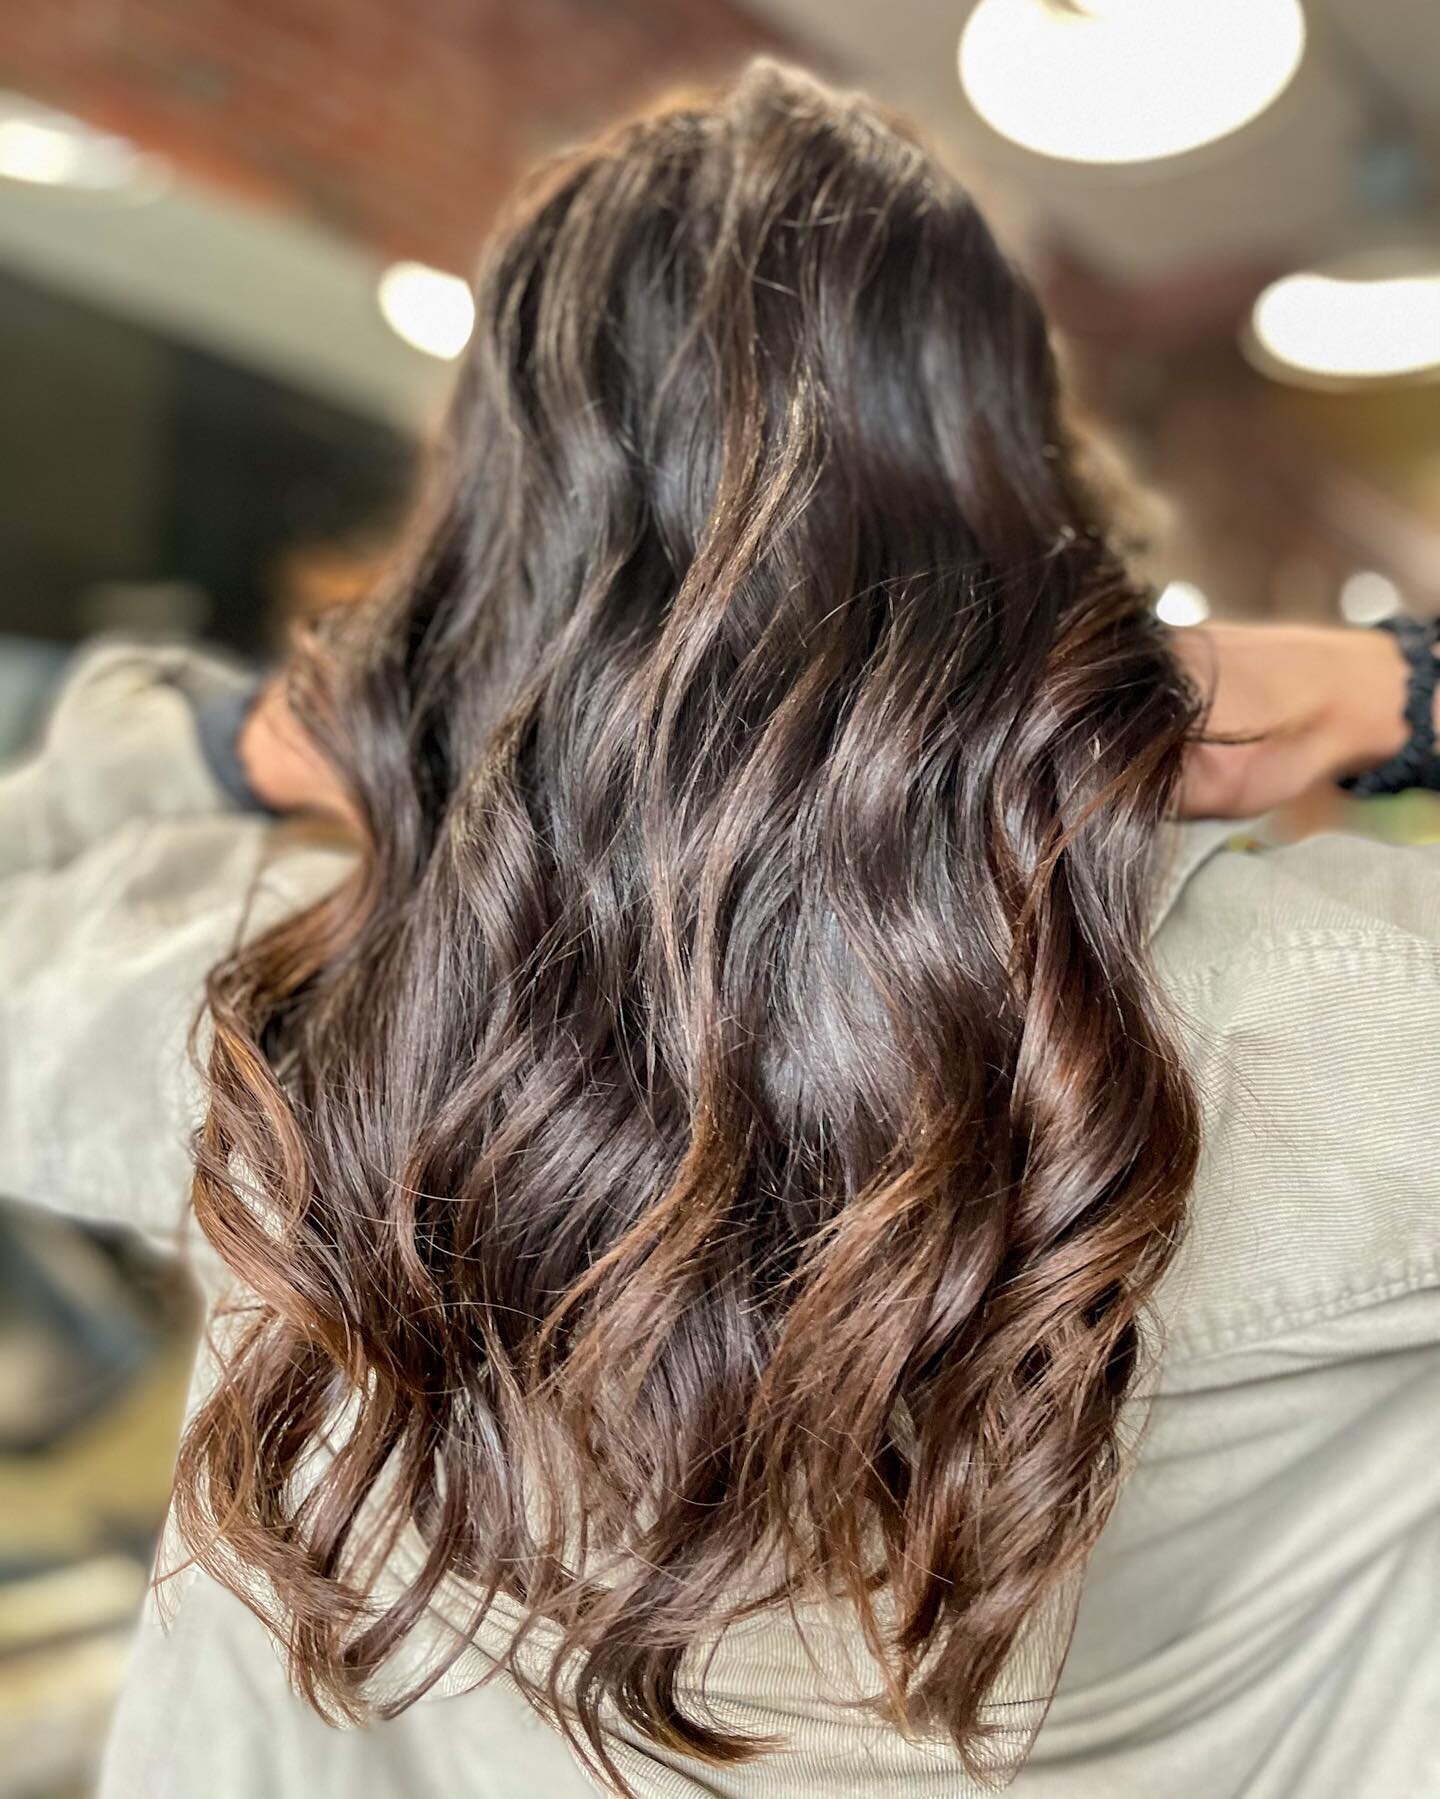 Would you believe it!? This look was achieved with the GHD rise. It took Mia about 30 minutes to complete the look. Swipe to see it in actions. ⁠⁠
Products used: GHD Curly Ever After Heat Protector, Aveda Pure Abundance Volumizing Hair Potion and Ave